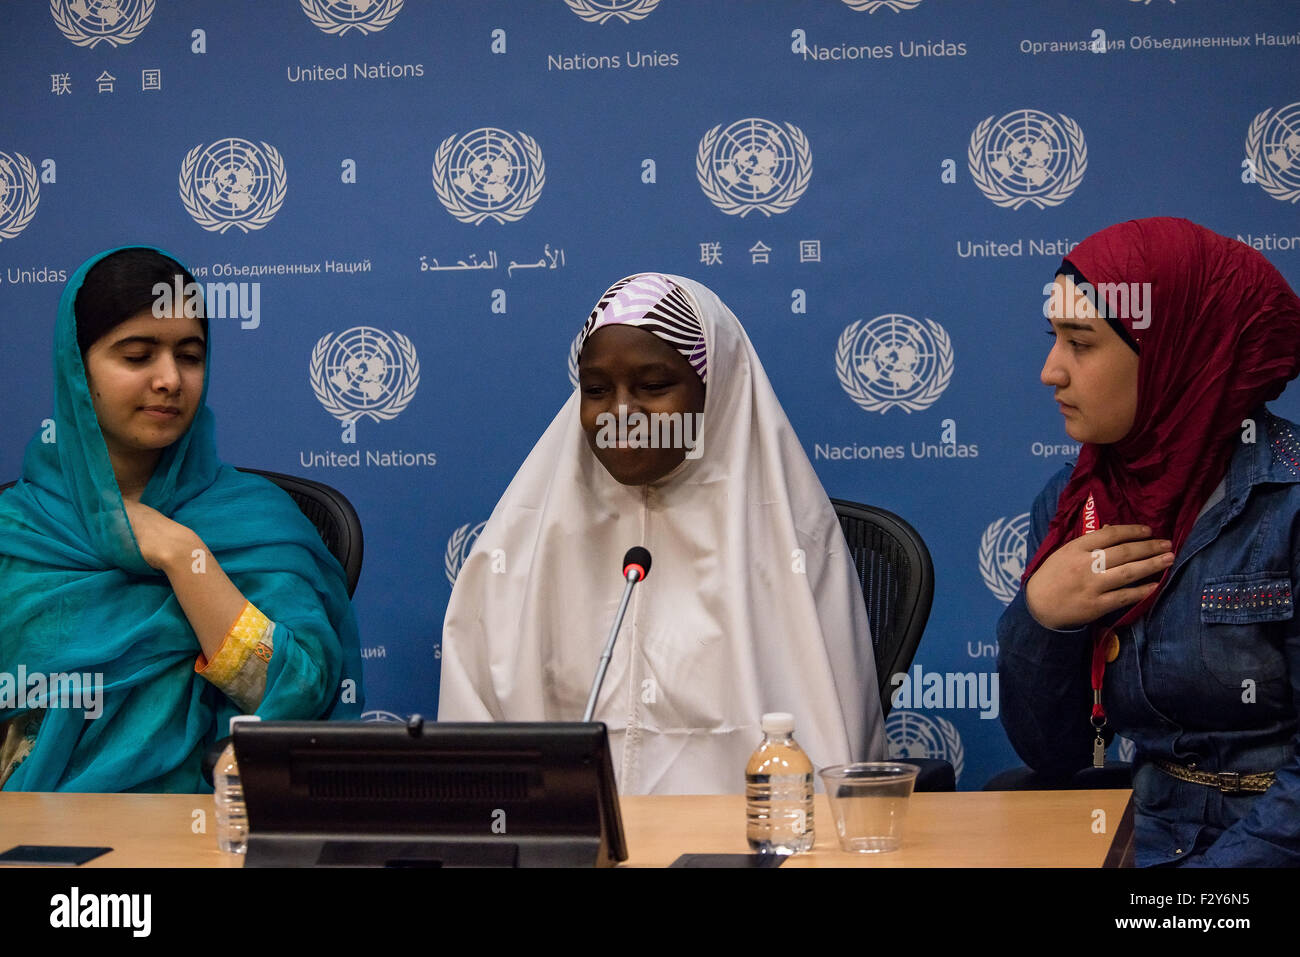 New York, United States. 22nd Sep, 2015. Malala Yousafzai (left), accompanied by four other young women, spoke at a press conference at the United Nations, emphasizing the need to expand educational opportunities in Pakistan. © Albin Lohr-Jones/Pacific Press/Alamy Live News Stock Photo